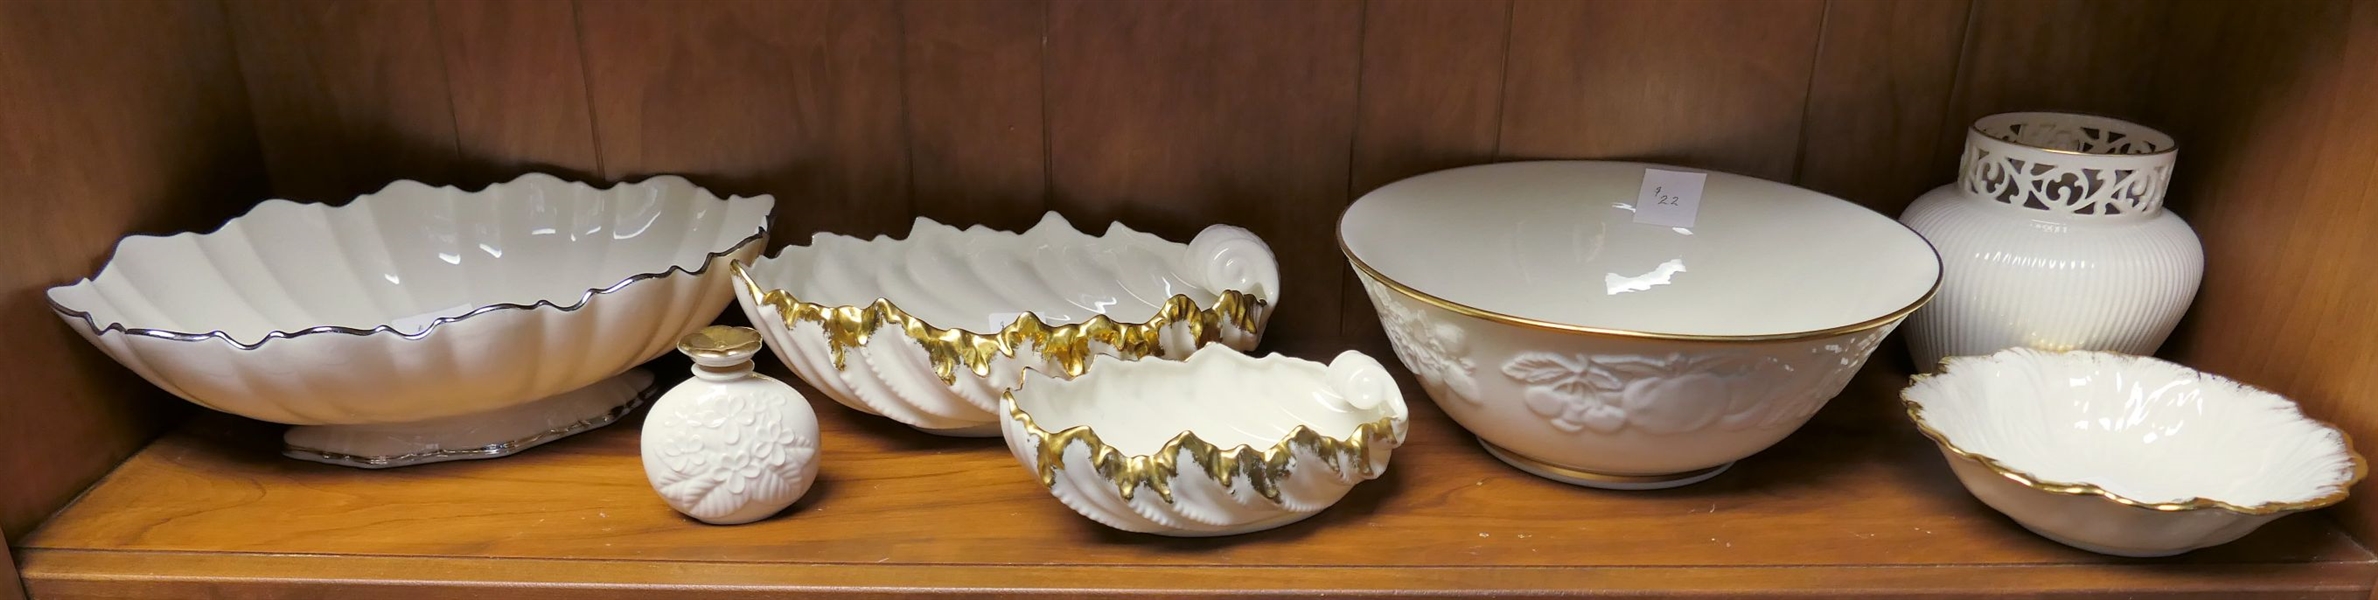 7 Pieces of Lenox including 11" Oval Bowl with Platinum Trim, 9" Fruit Bowl, Pierced Rim Vase, 2 Shell Dishes